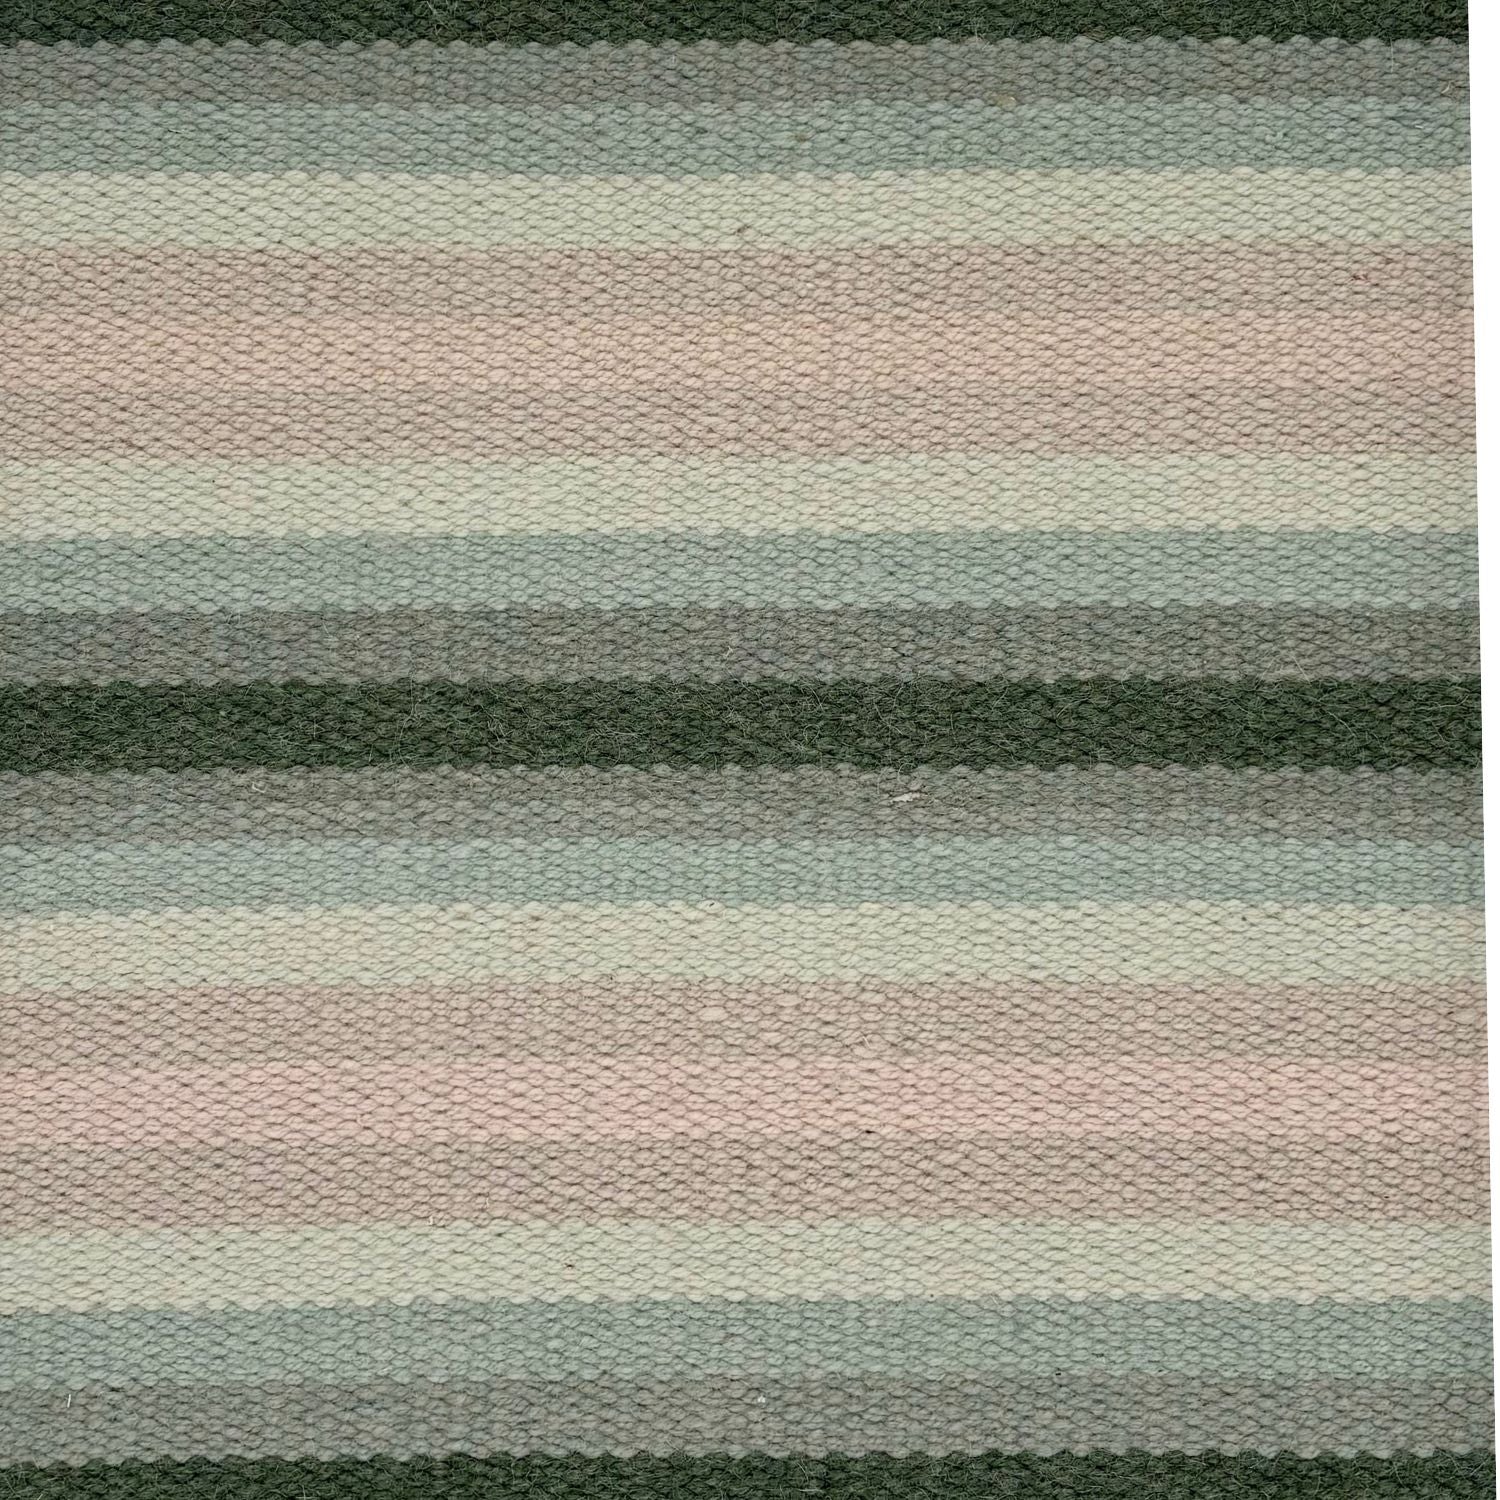 A flatweave rug with stripes in 3 shades of green, 2 shades of pale pink, and ivory.